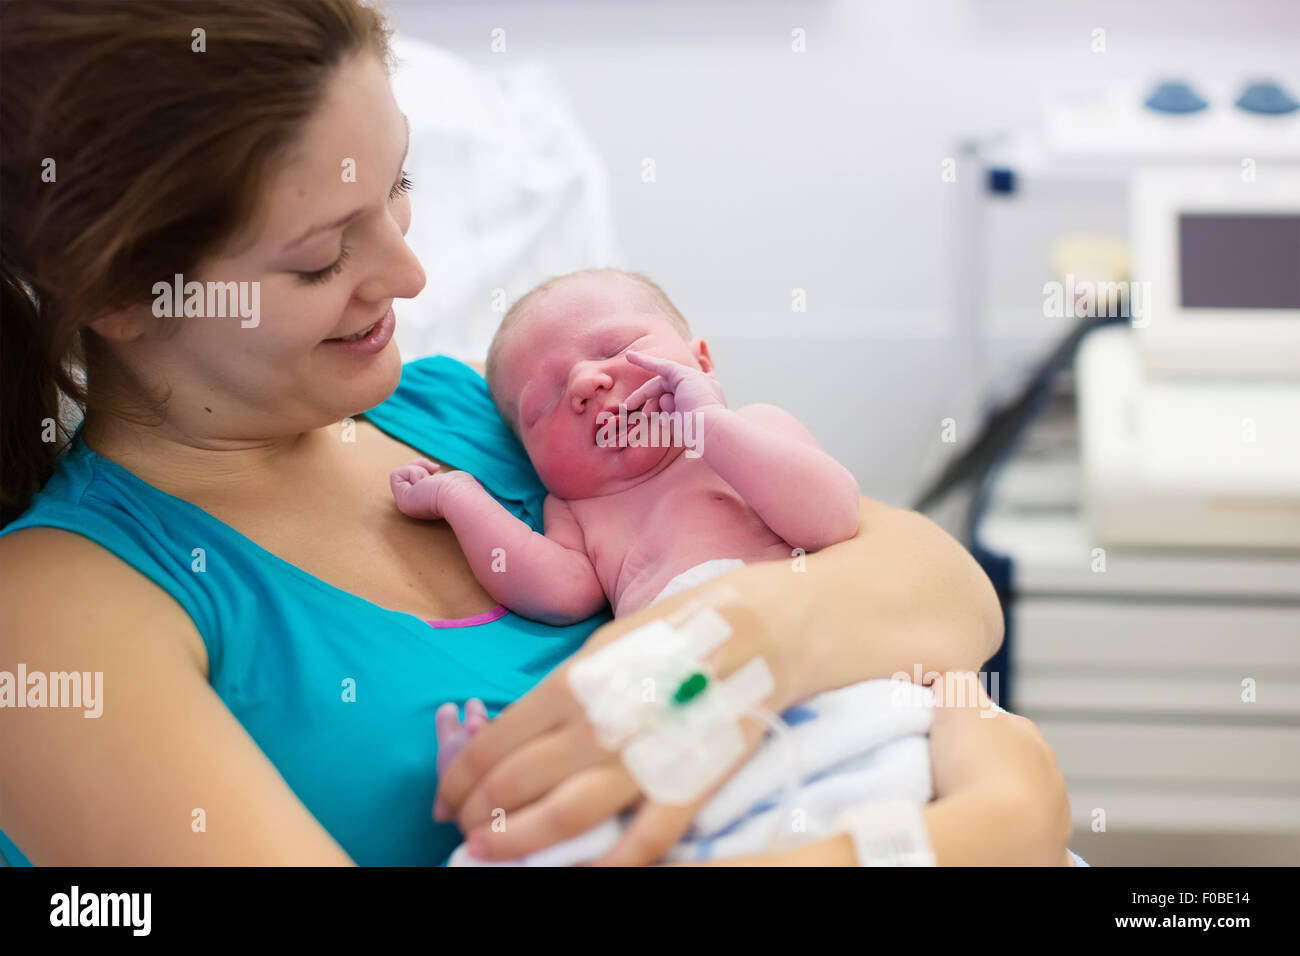 https://c8.alamy.com/comp/F0BE14/mother-giving-birth-to-a-baby-newborn-baby-in-delivery-room-mom-holding-F0BE14.jpg